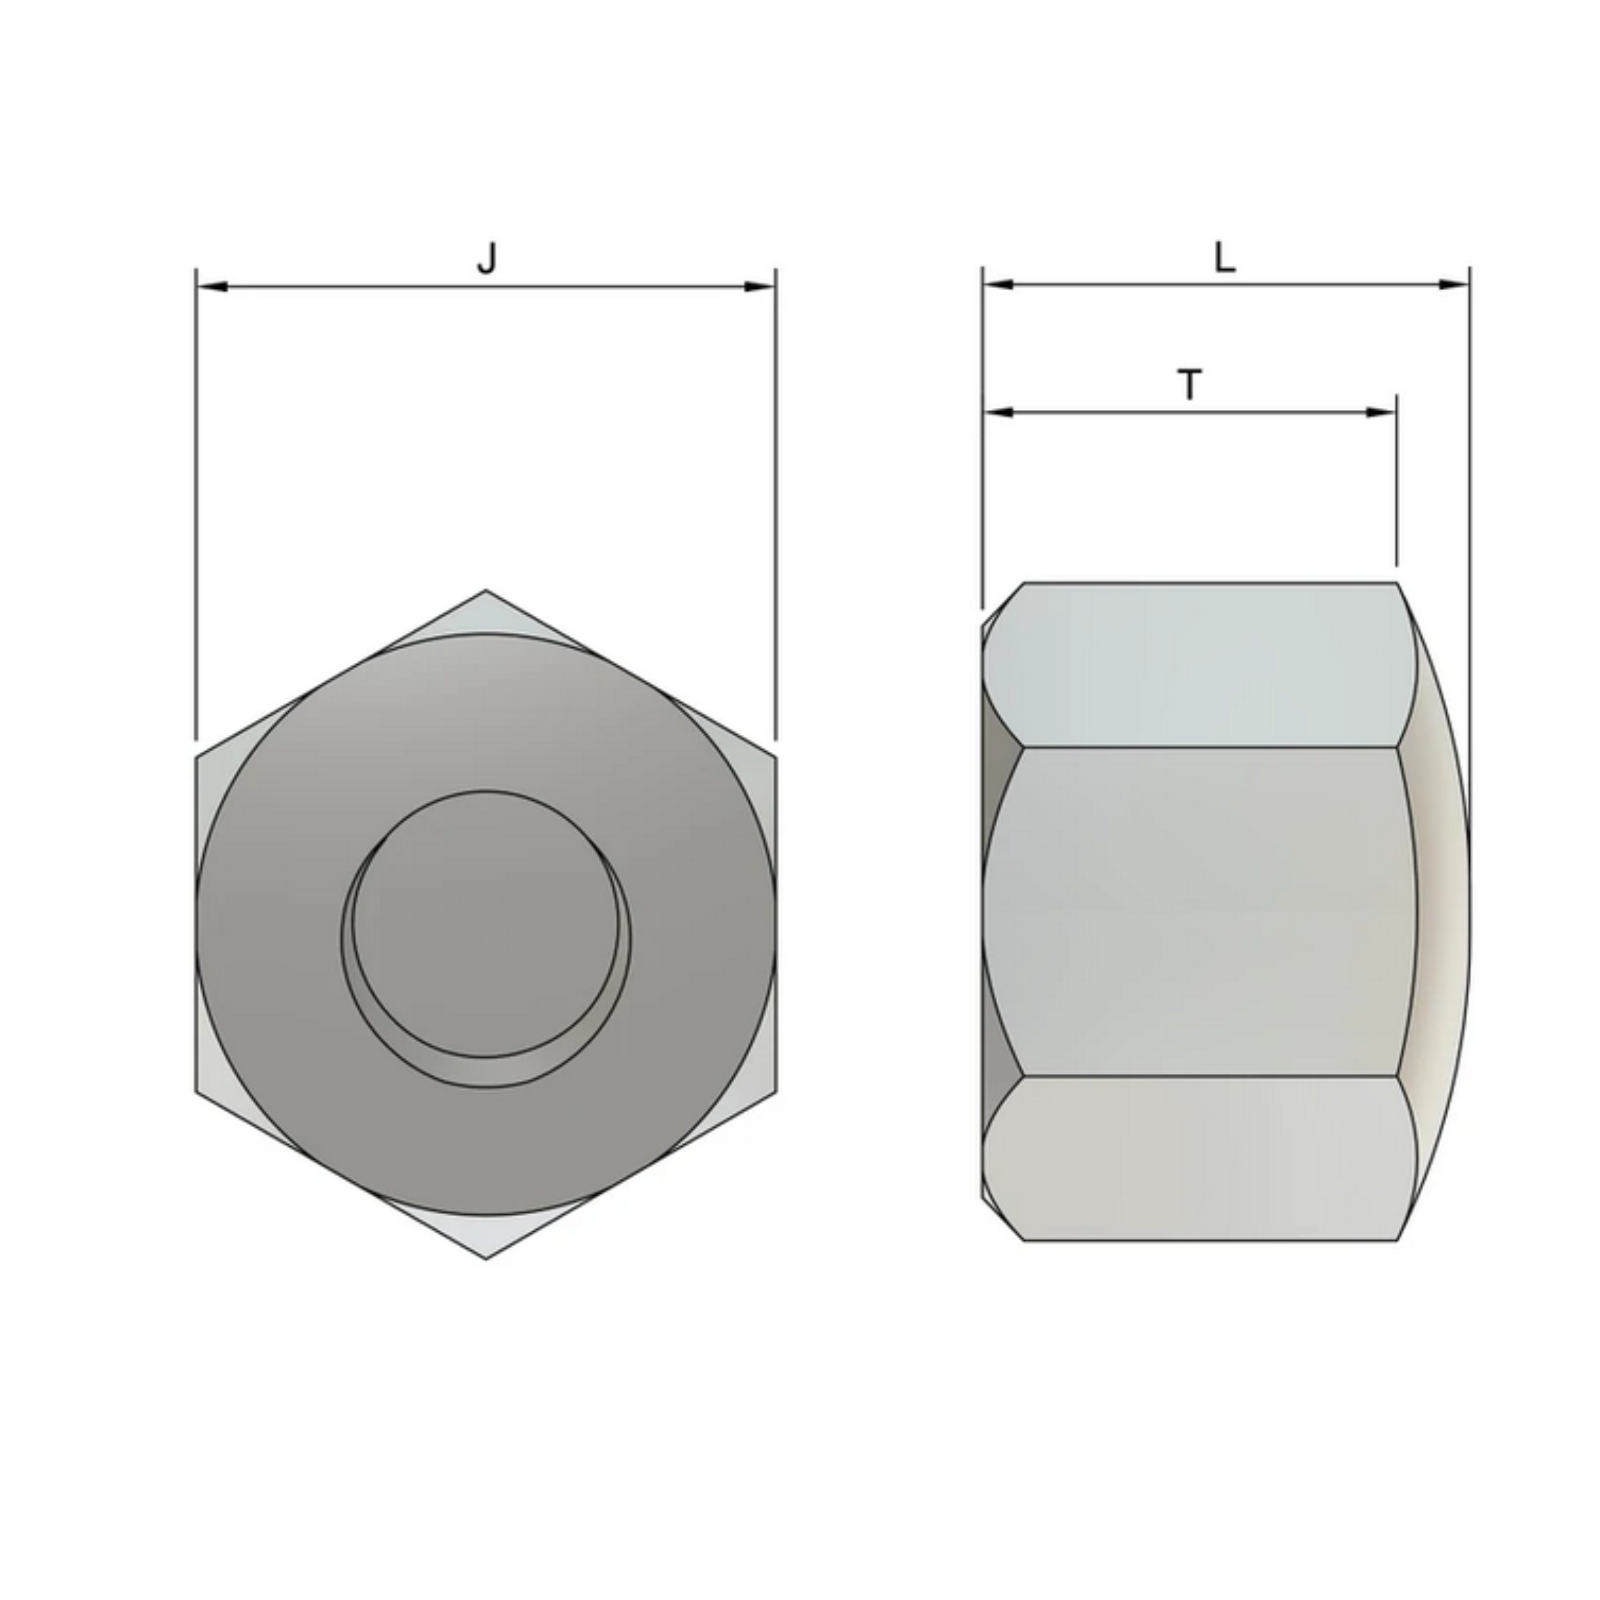 M5 Cap Nuts (DIN 917) - Stainless Steel (A4)